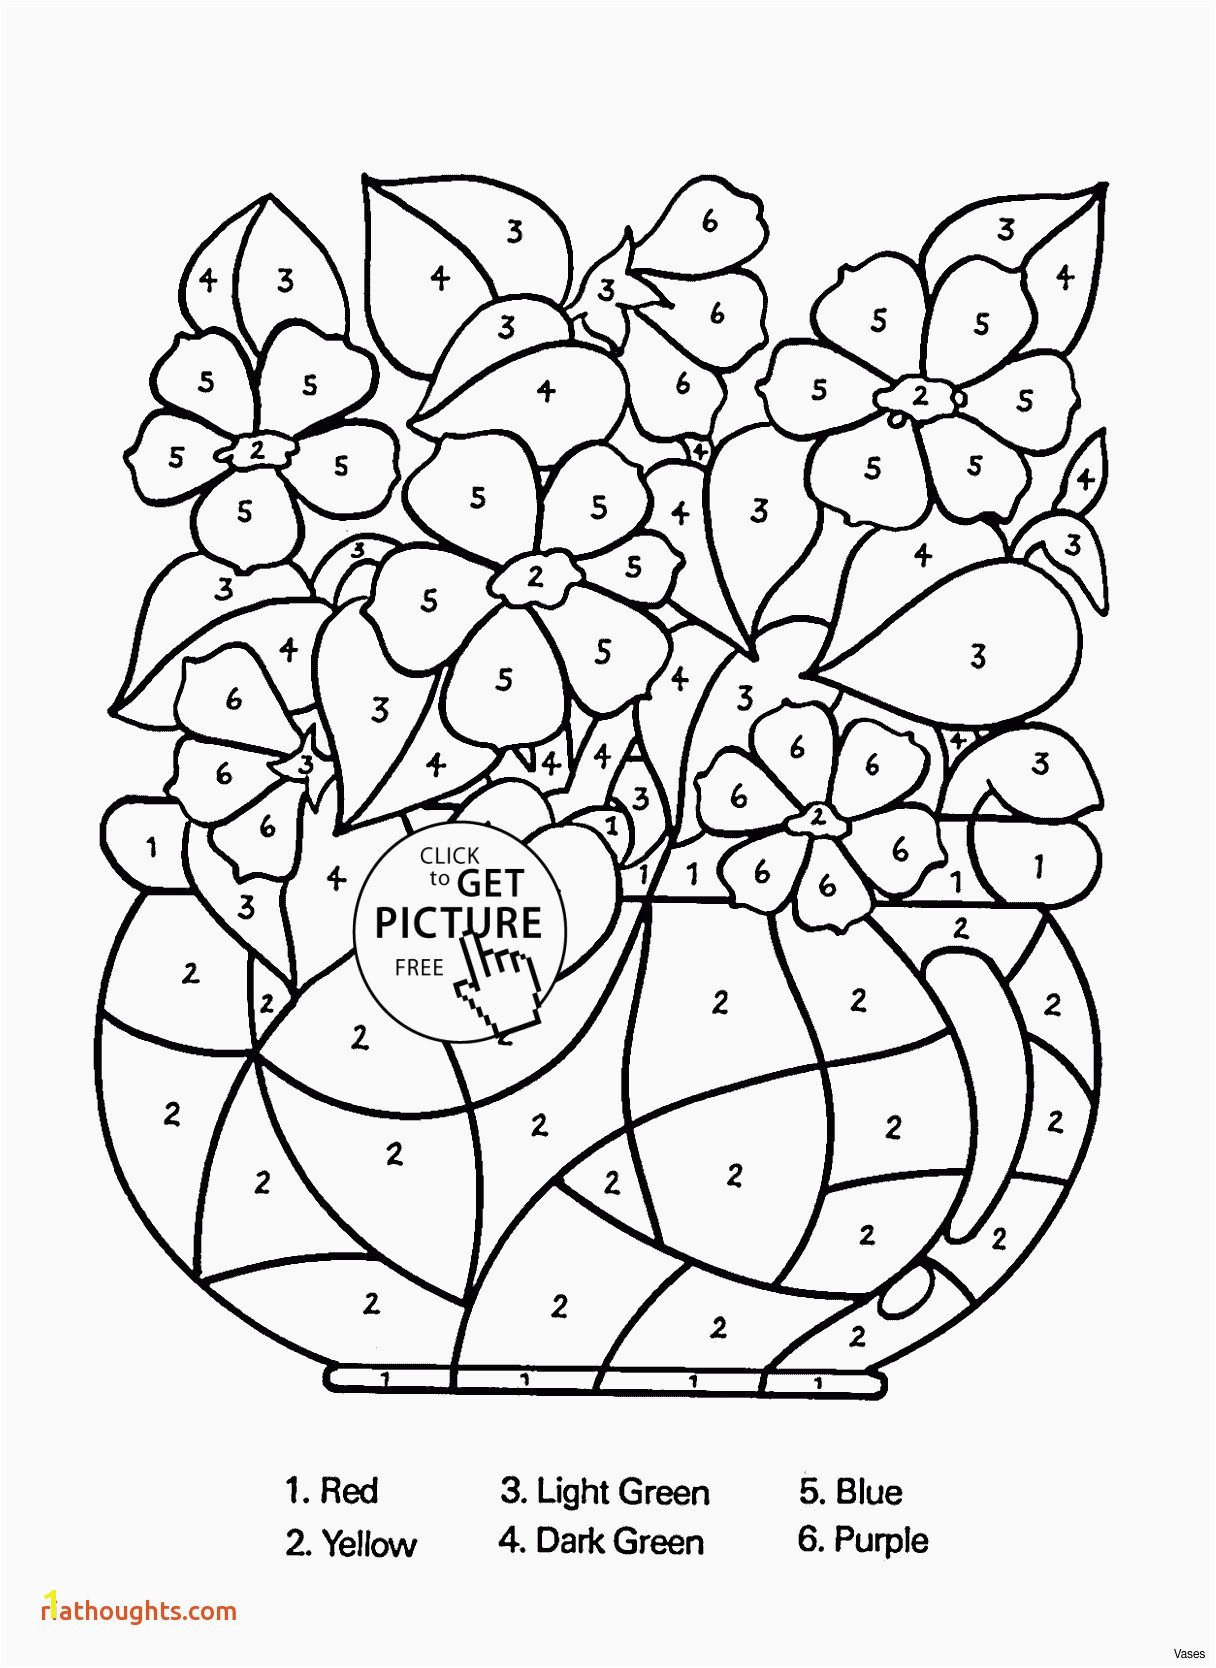 Green Angry Bird Coloring Pages Luxury Big Apple Coloring Pages Katesgrove